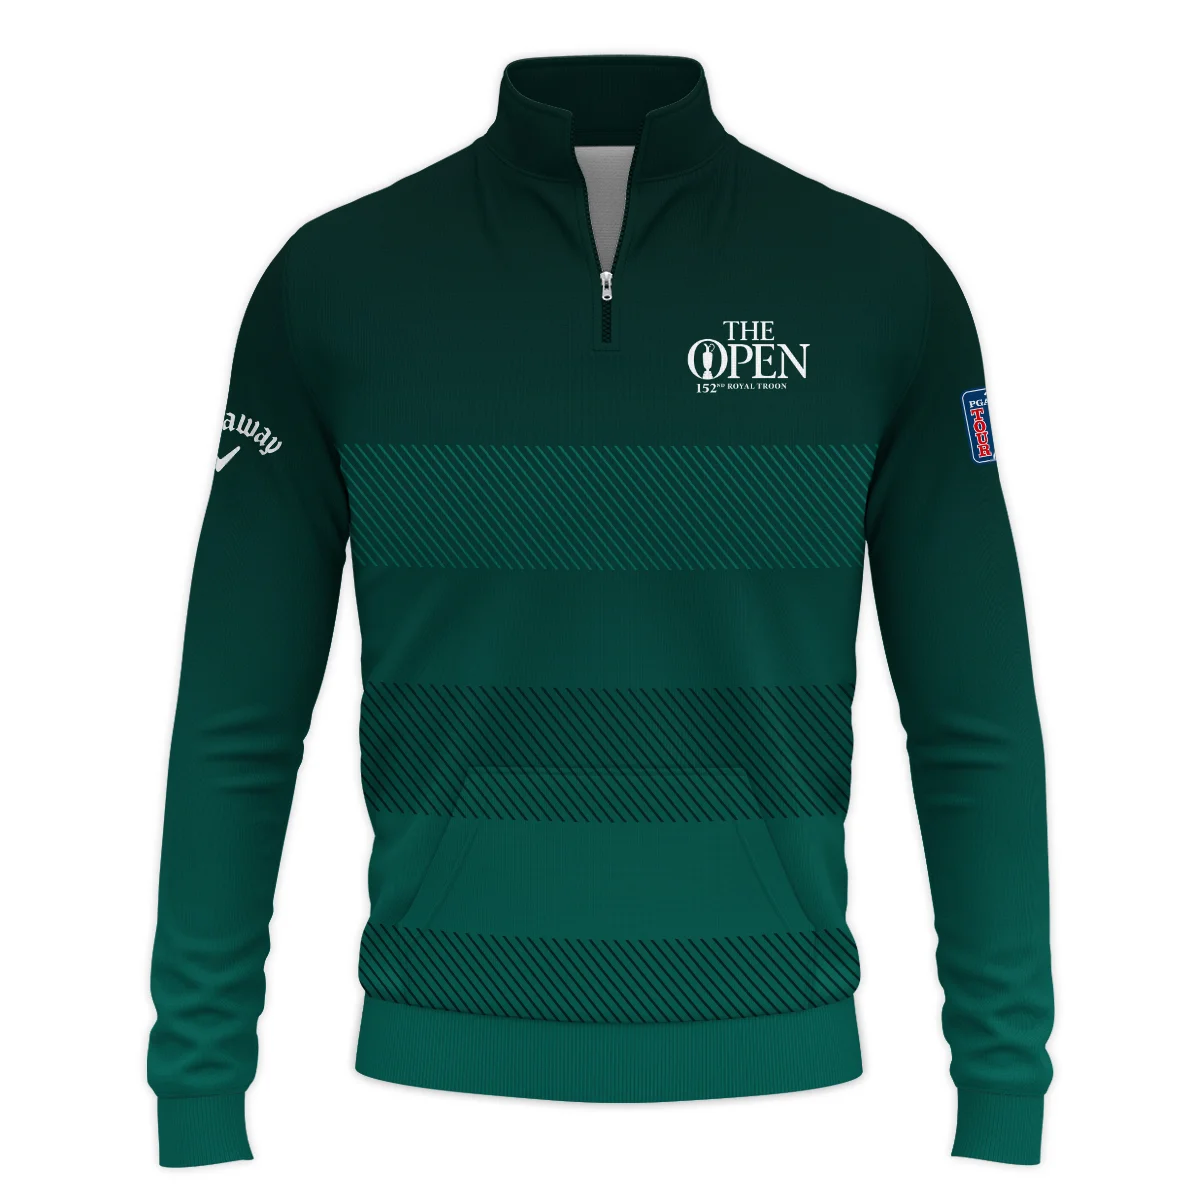 152nd Open Championship Callaway Dark Green Gradient Line Pattern Performance Quarter Zip Sweatshirt With Pockets All Over Prints HOTOP280624A01CLWTS